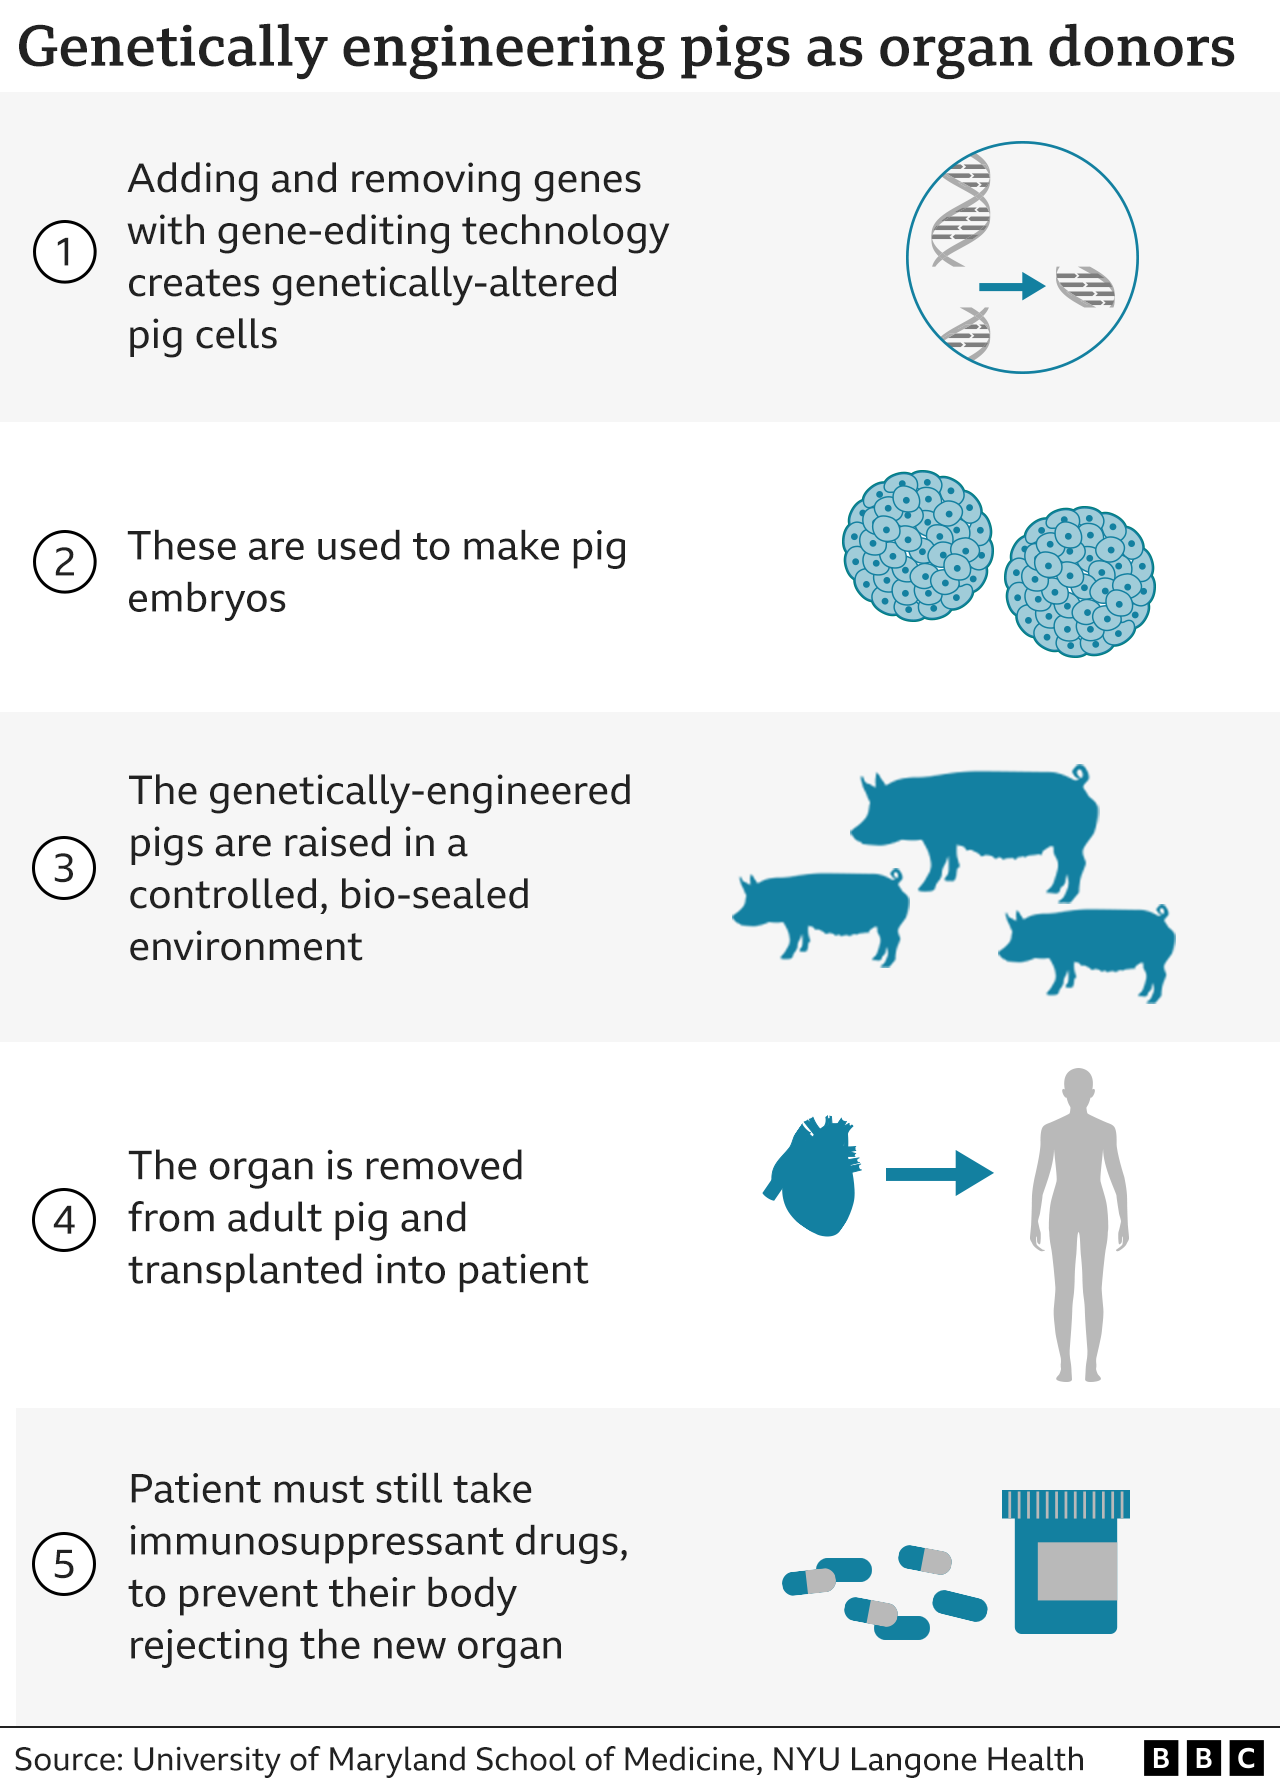 BBC News graphic showing processes involved in using genetically modified pig organs in humans